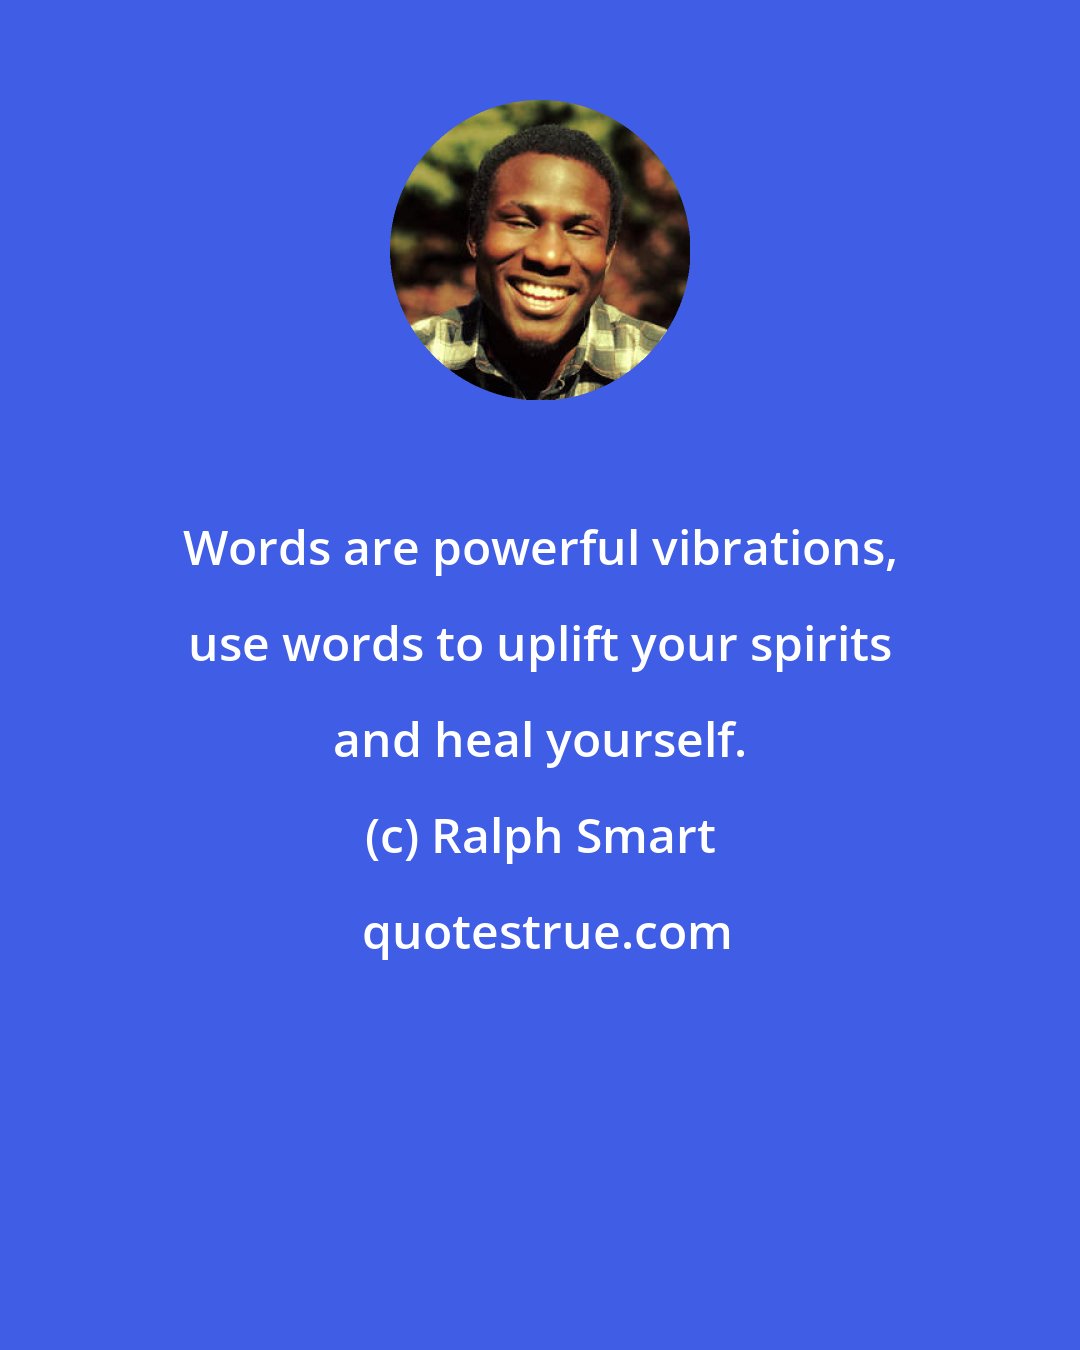 Ralph Smart: Words are powerful vibrations, use words to uplift your spirits and heal yourself.